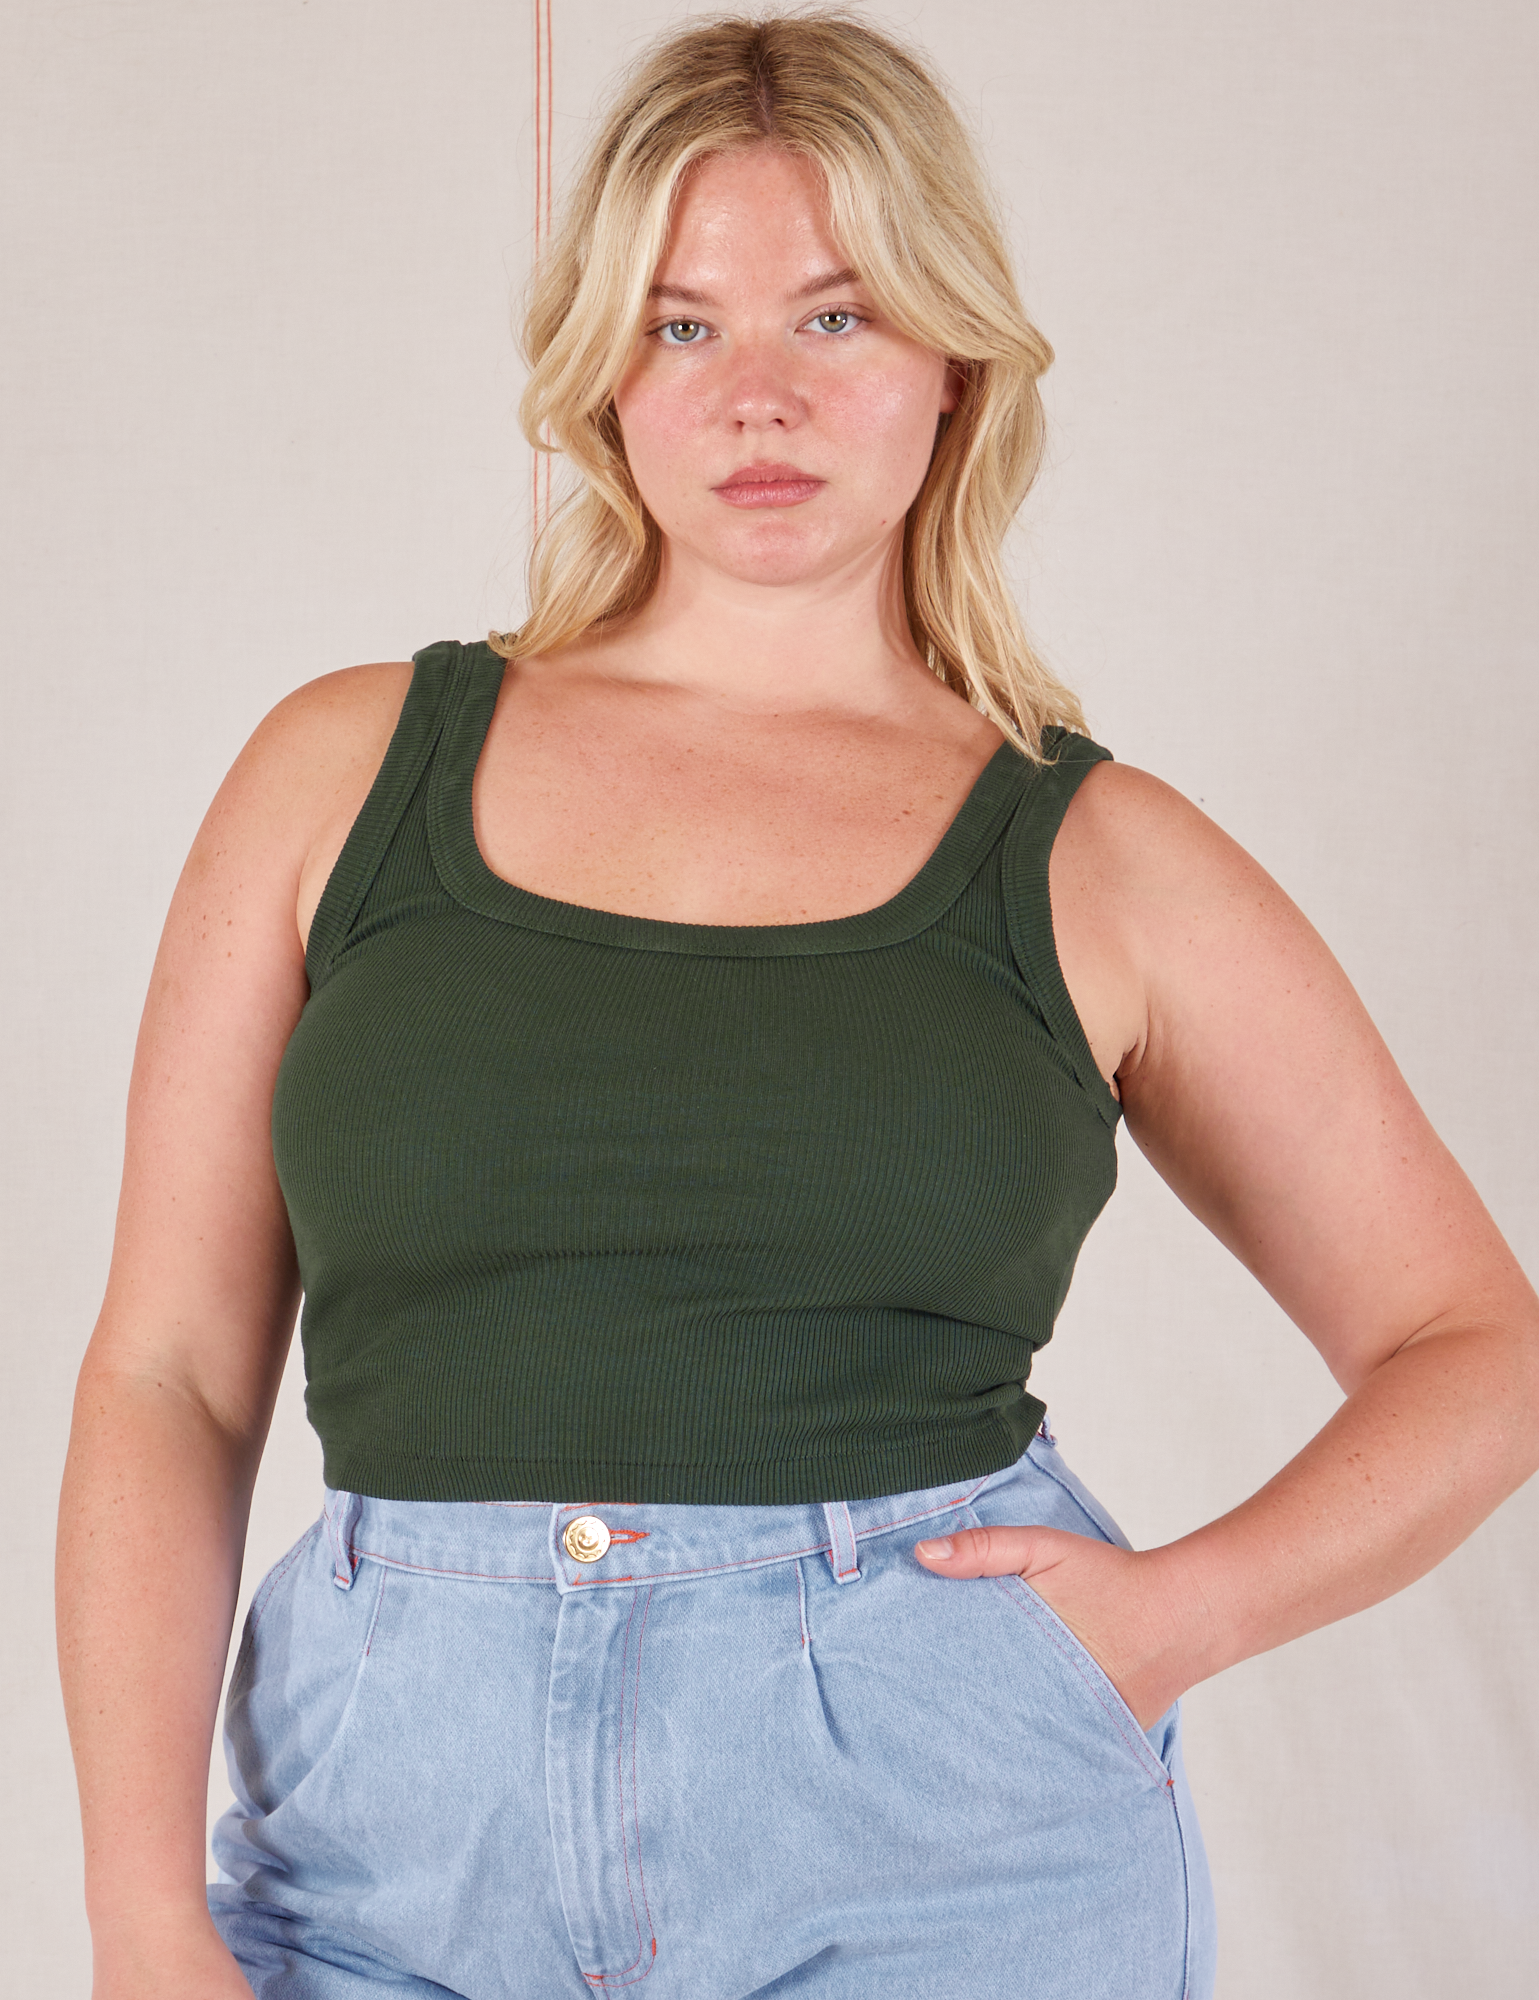 Lish is 5’8” and wearing L Square Neck Tank in Swamp Green